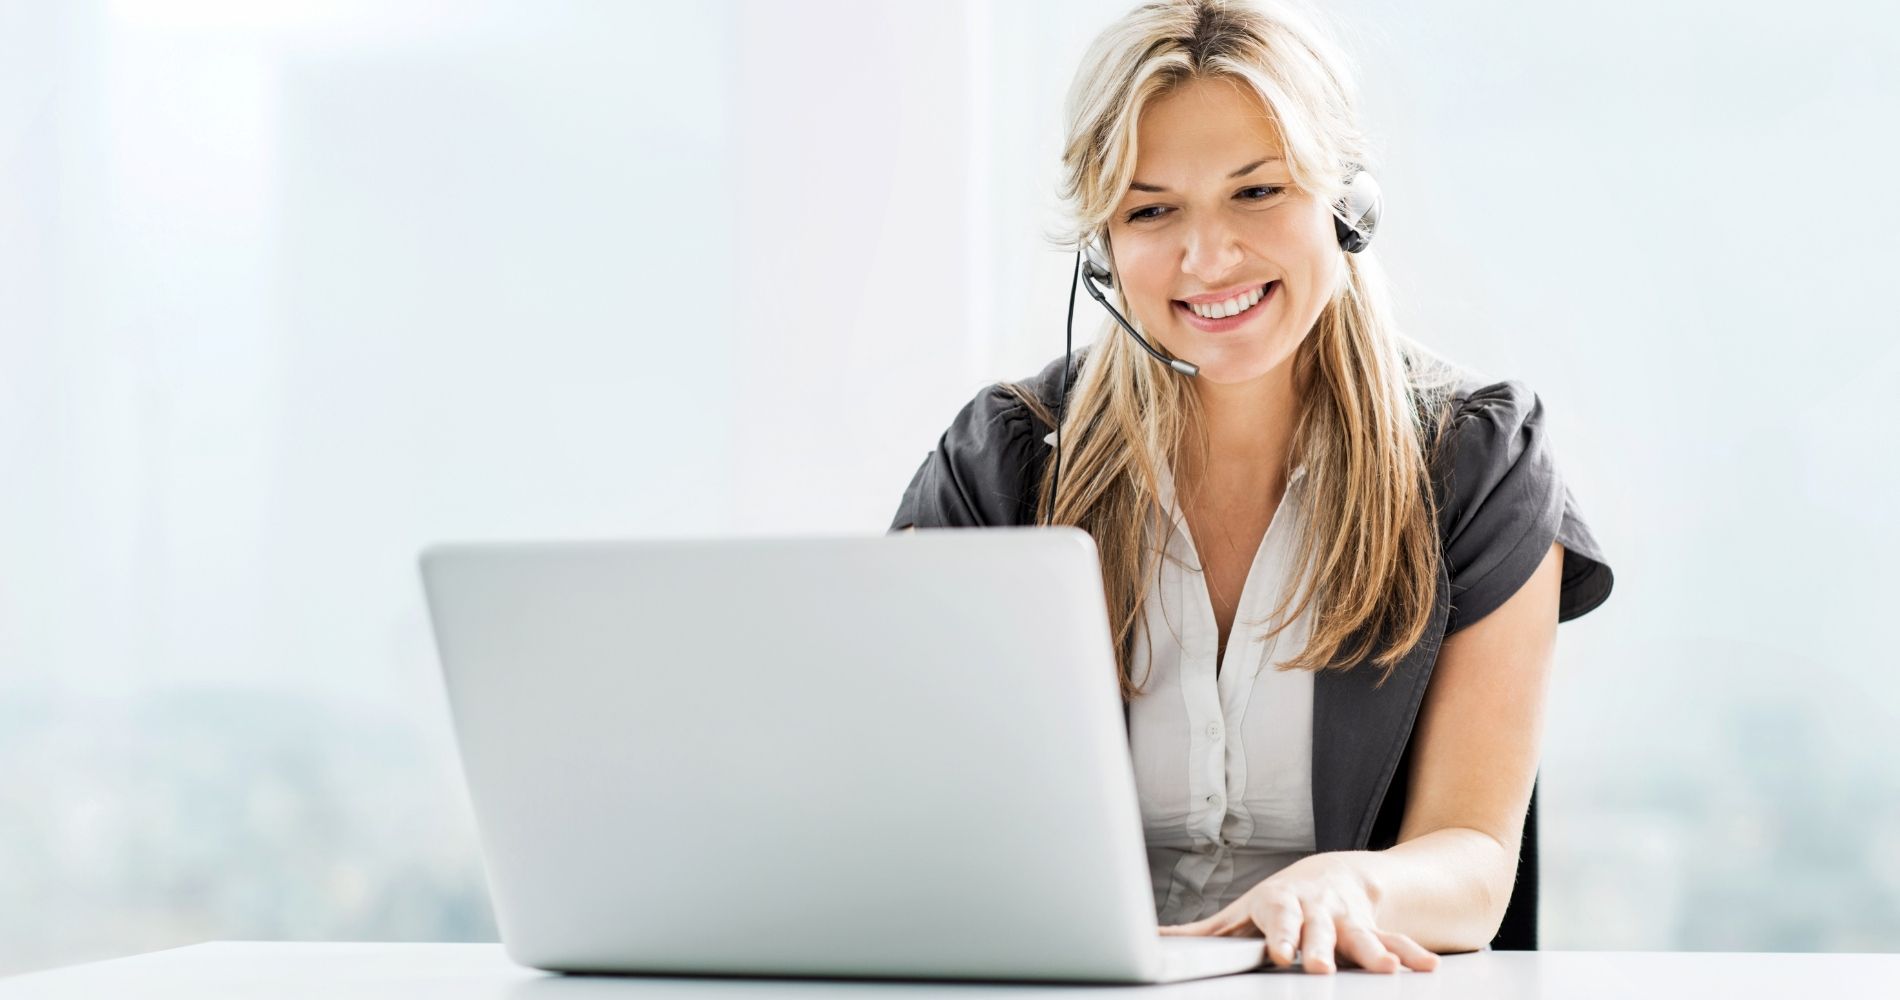 Six Ideas to Provide the Best Customer Service